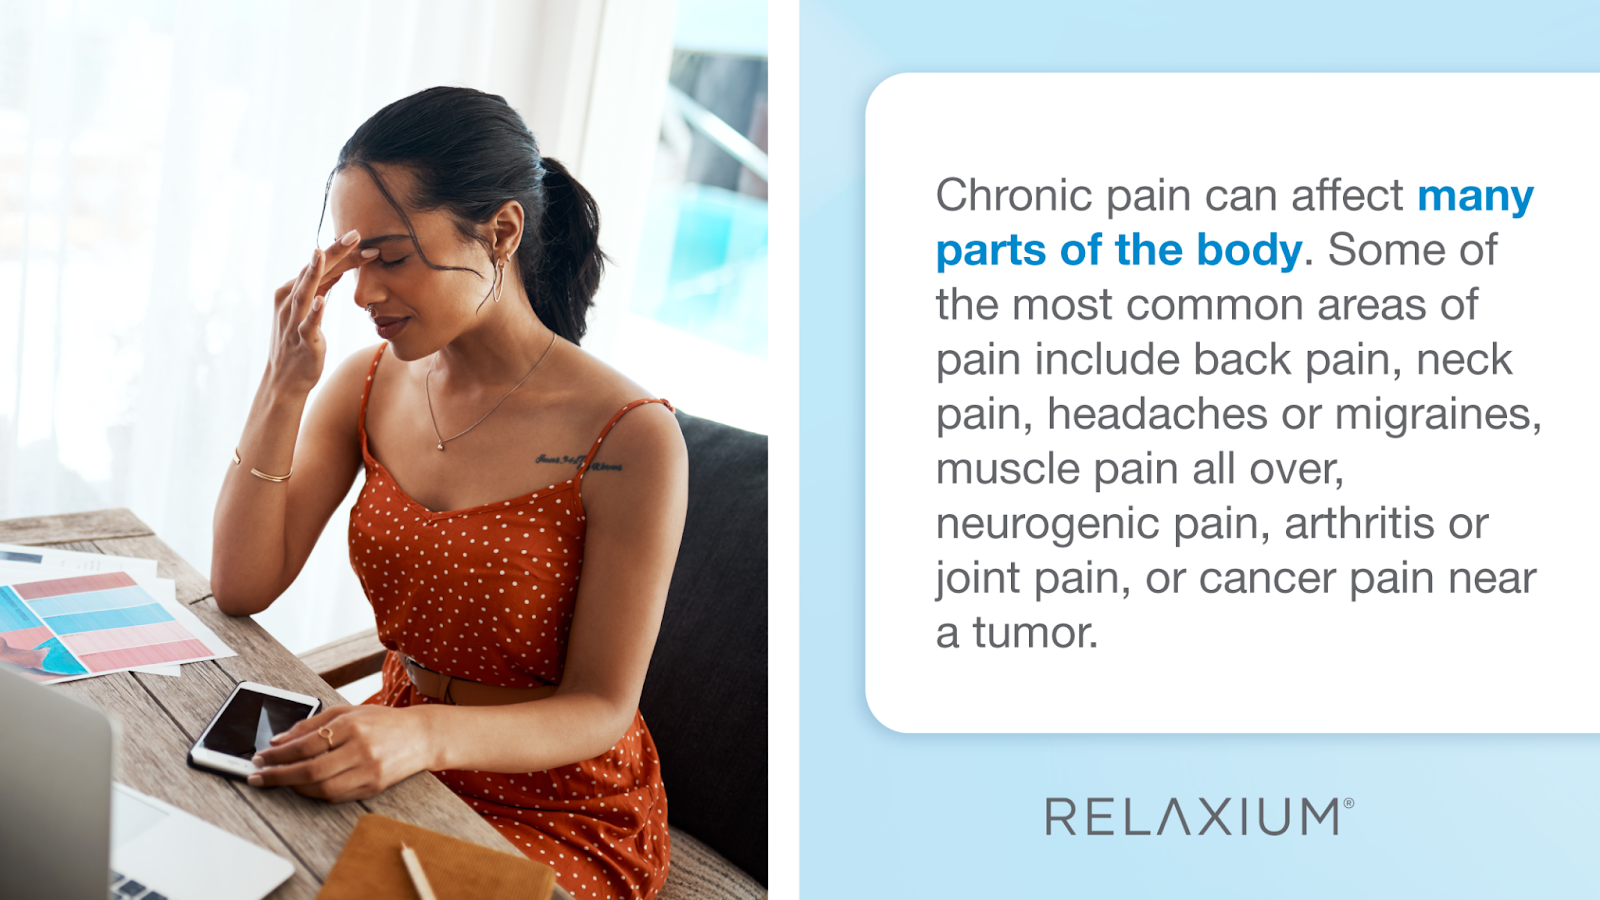 Chronic pain can affect many parts of the body.